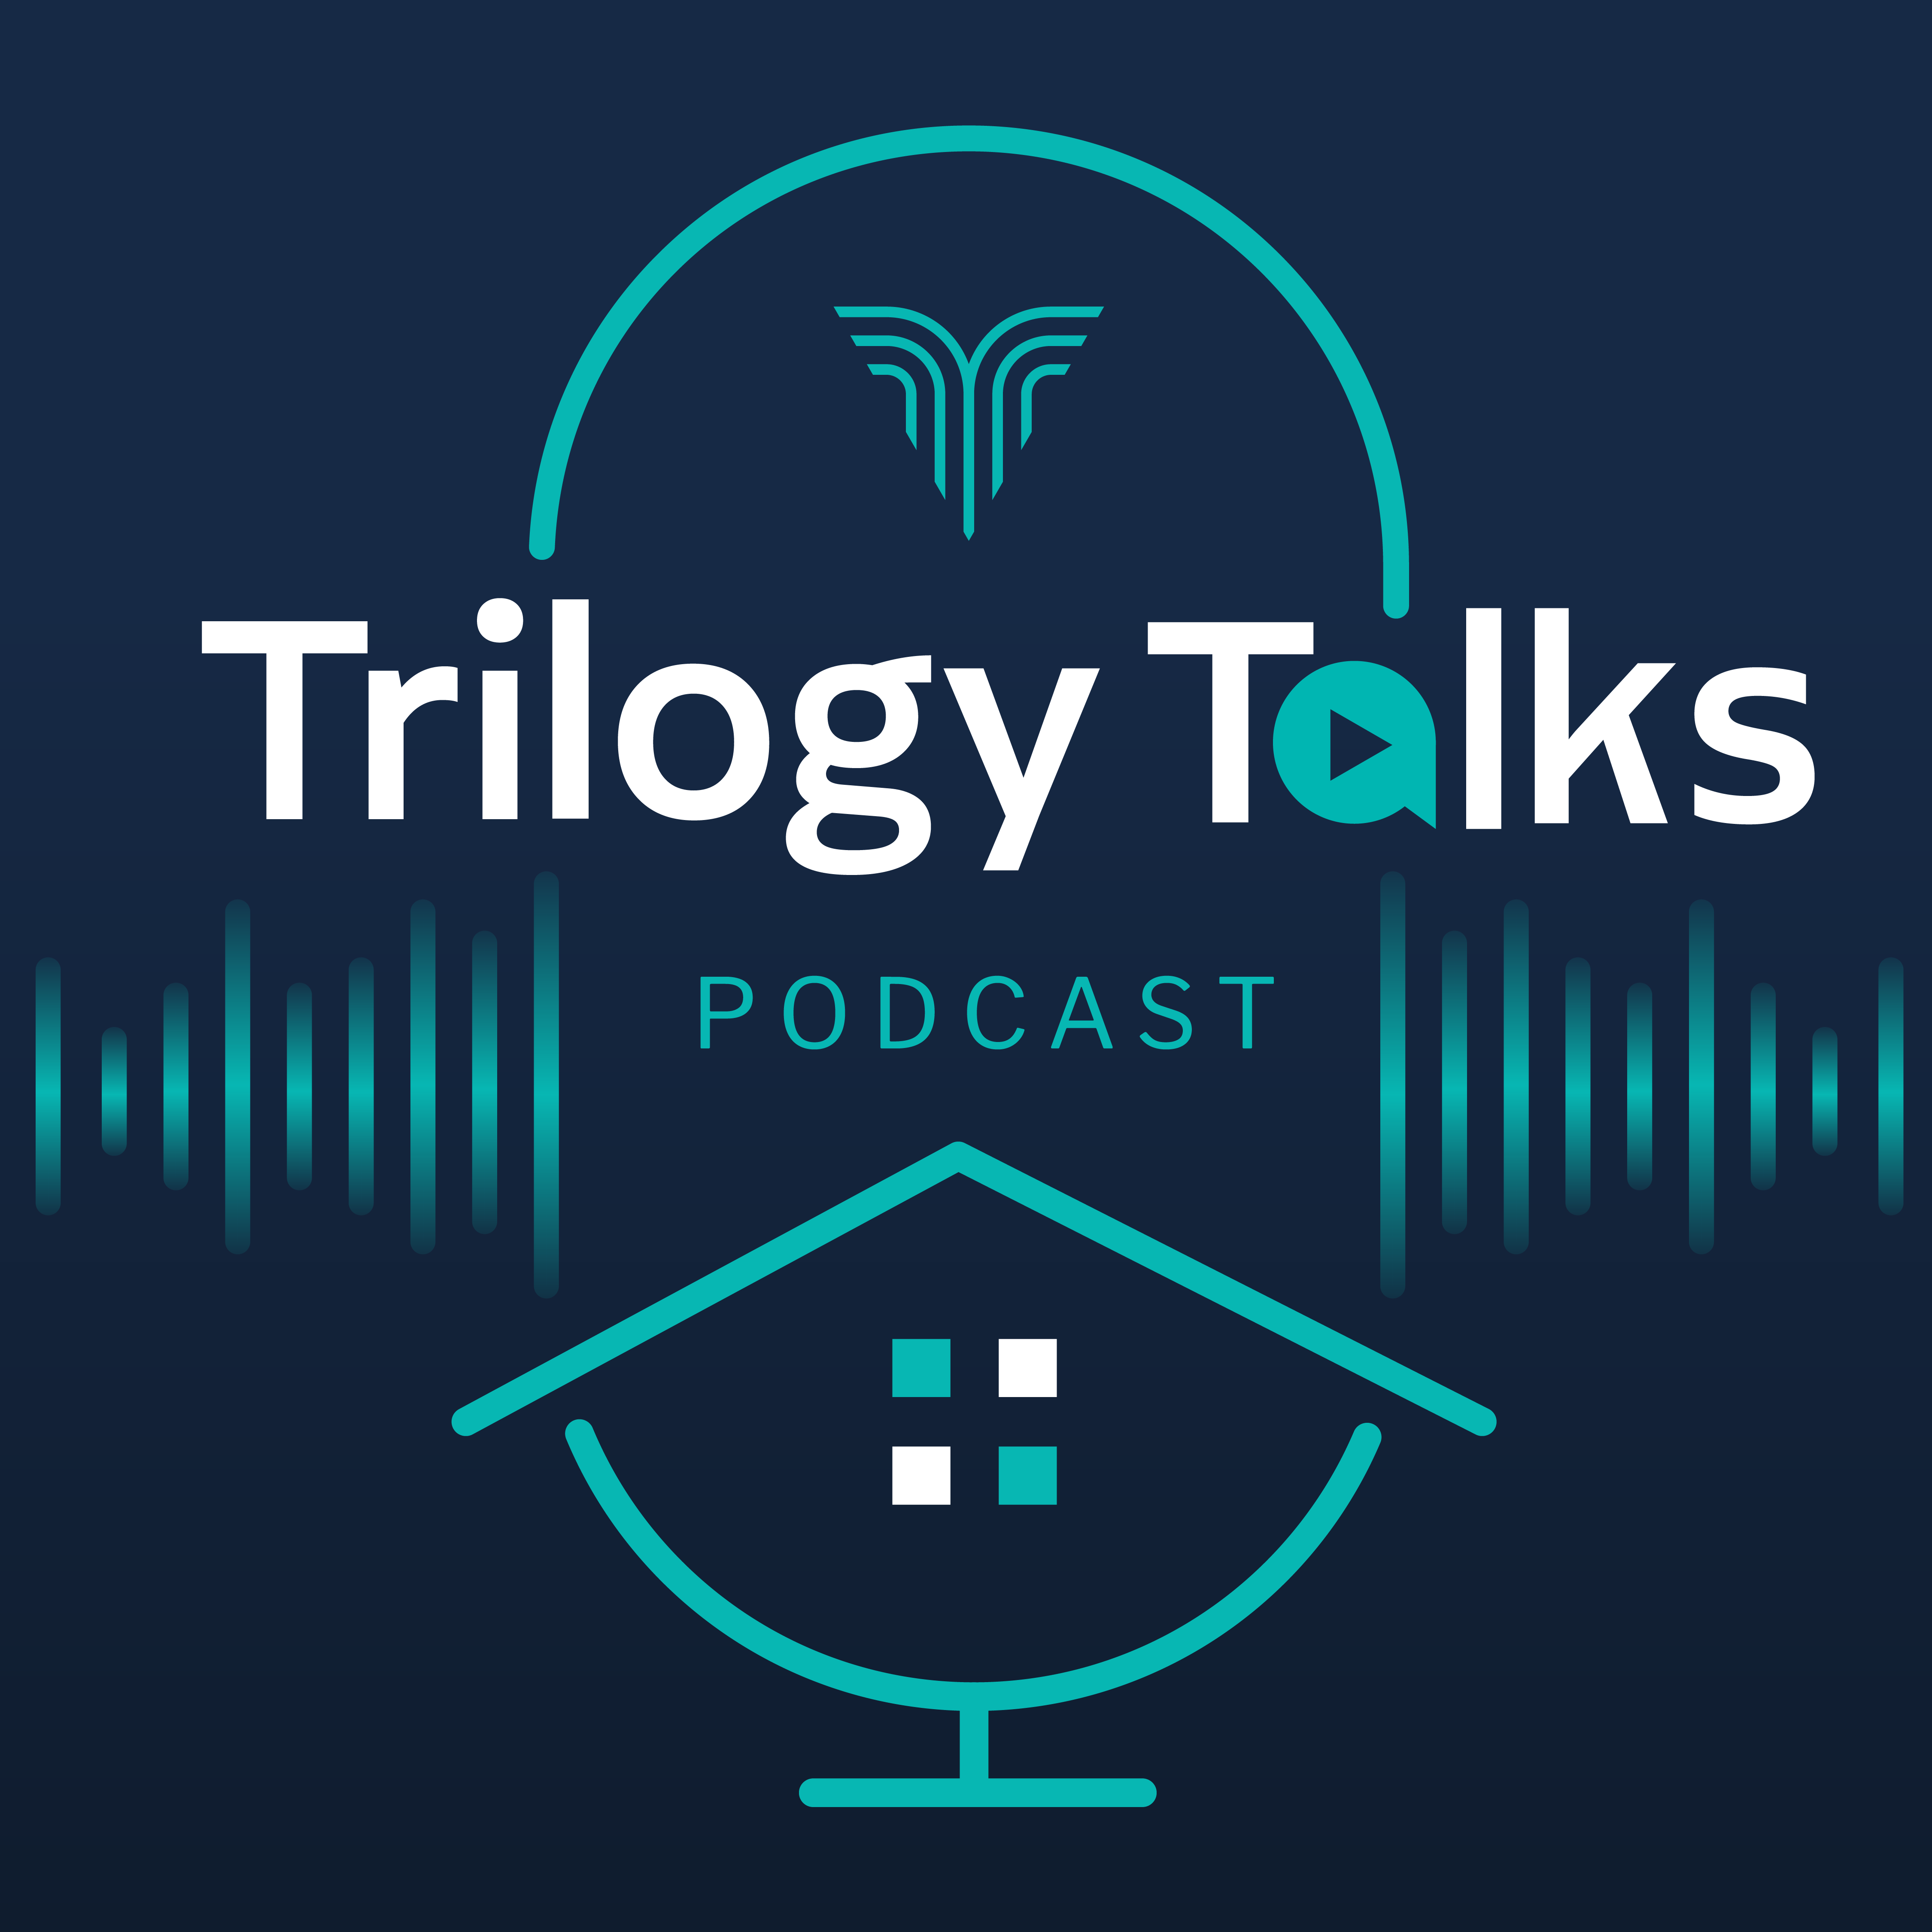 Podcast cover art with soundwaves and microphone and Trilogy Talks wording.